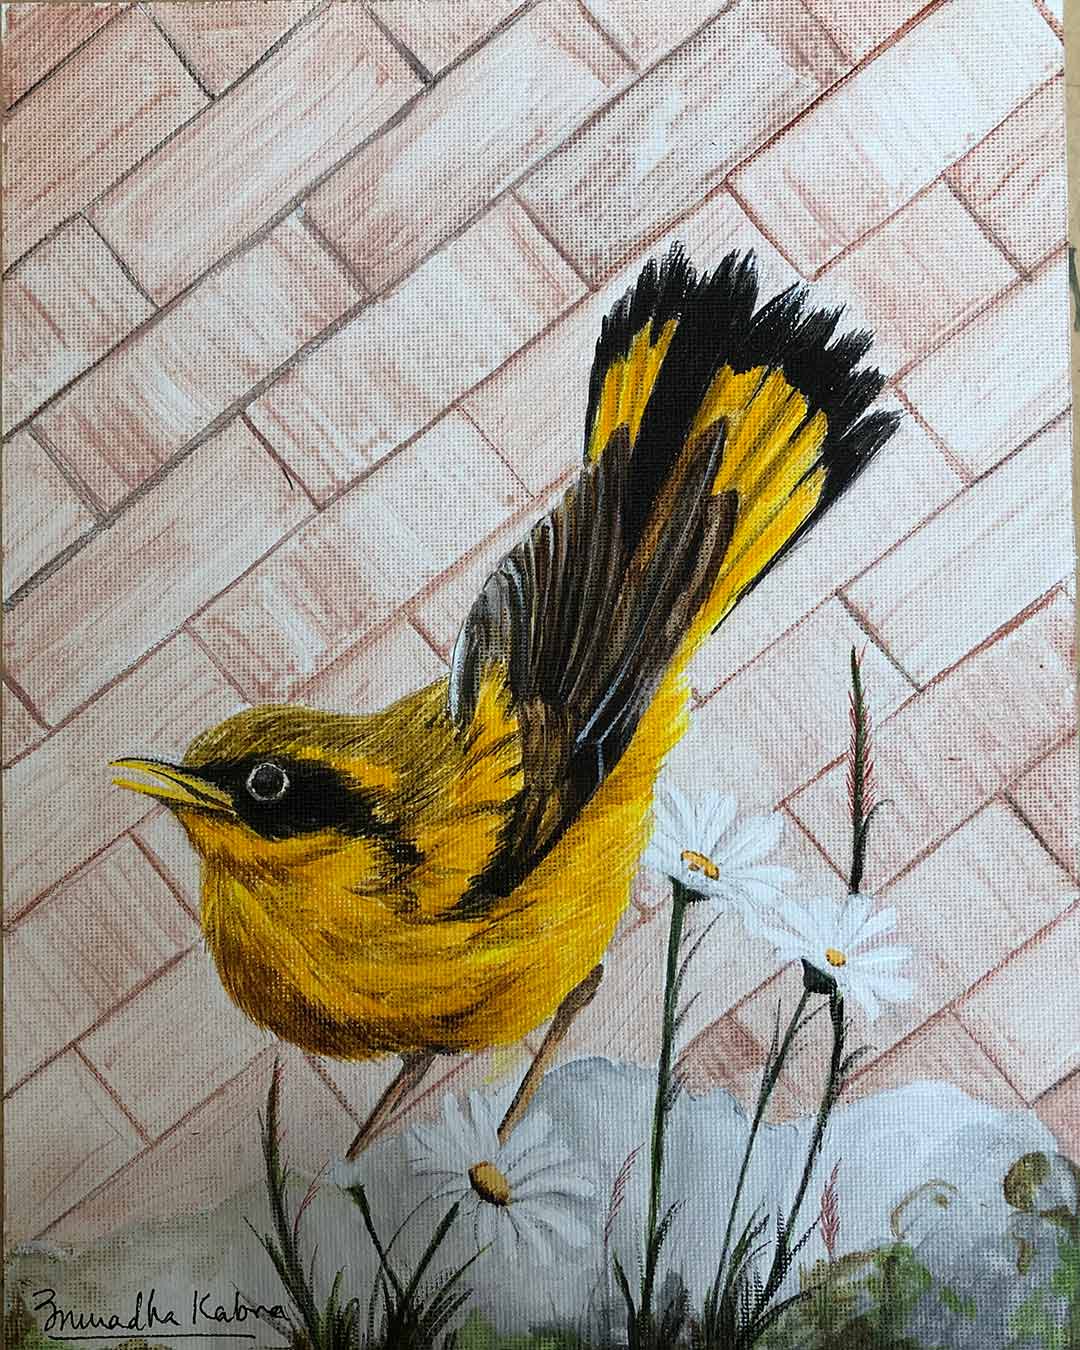 Buy painting online Singapore Exquisite Art Anuradha Kabra Indian Golden Oriole